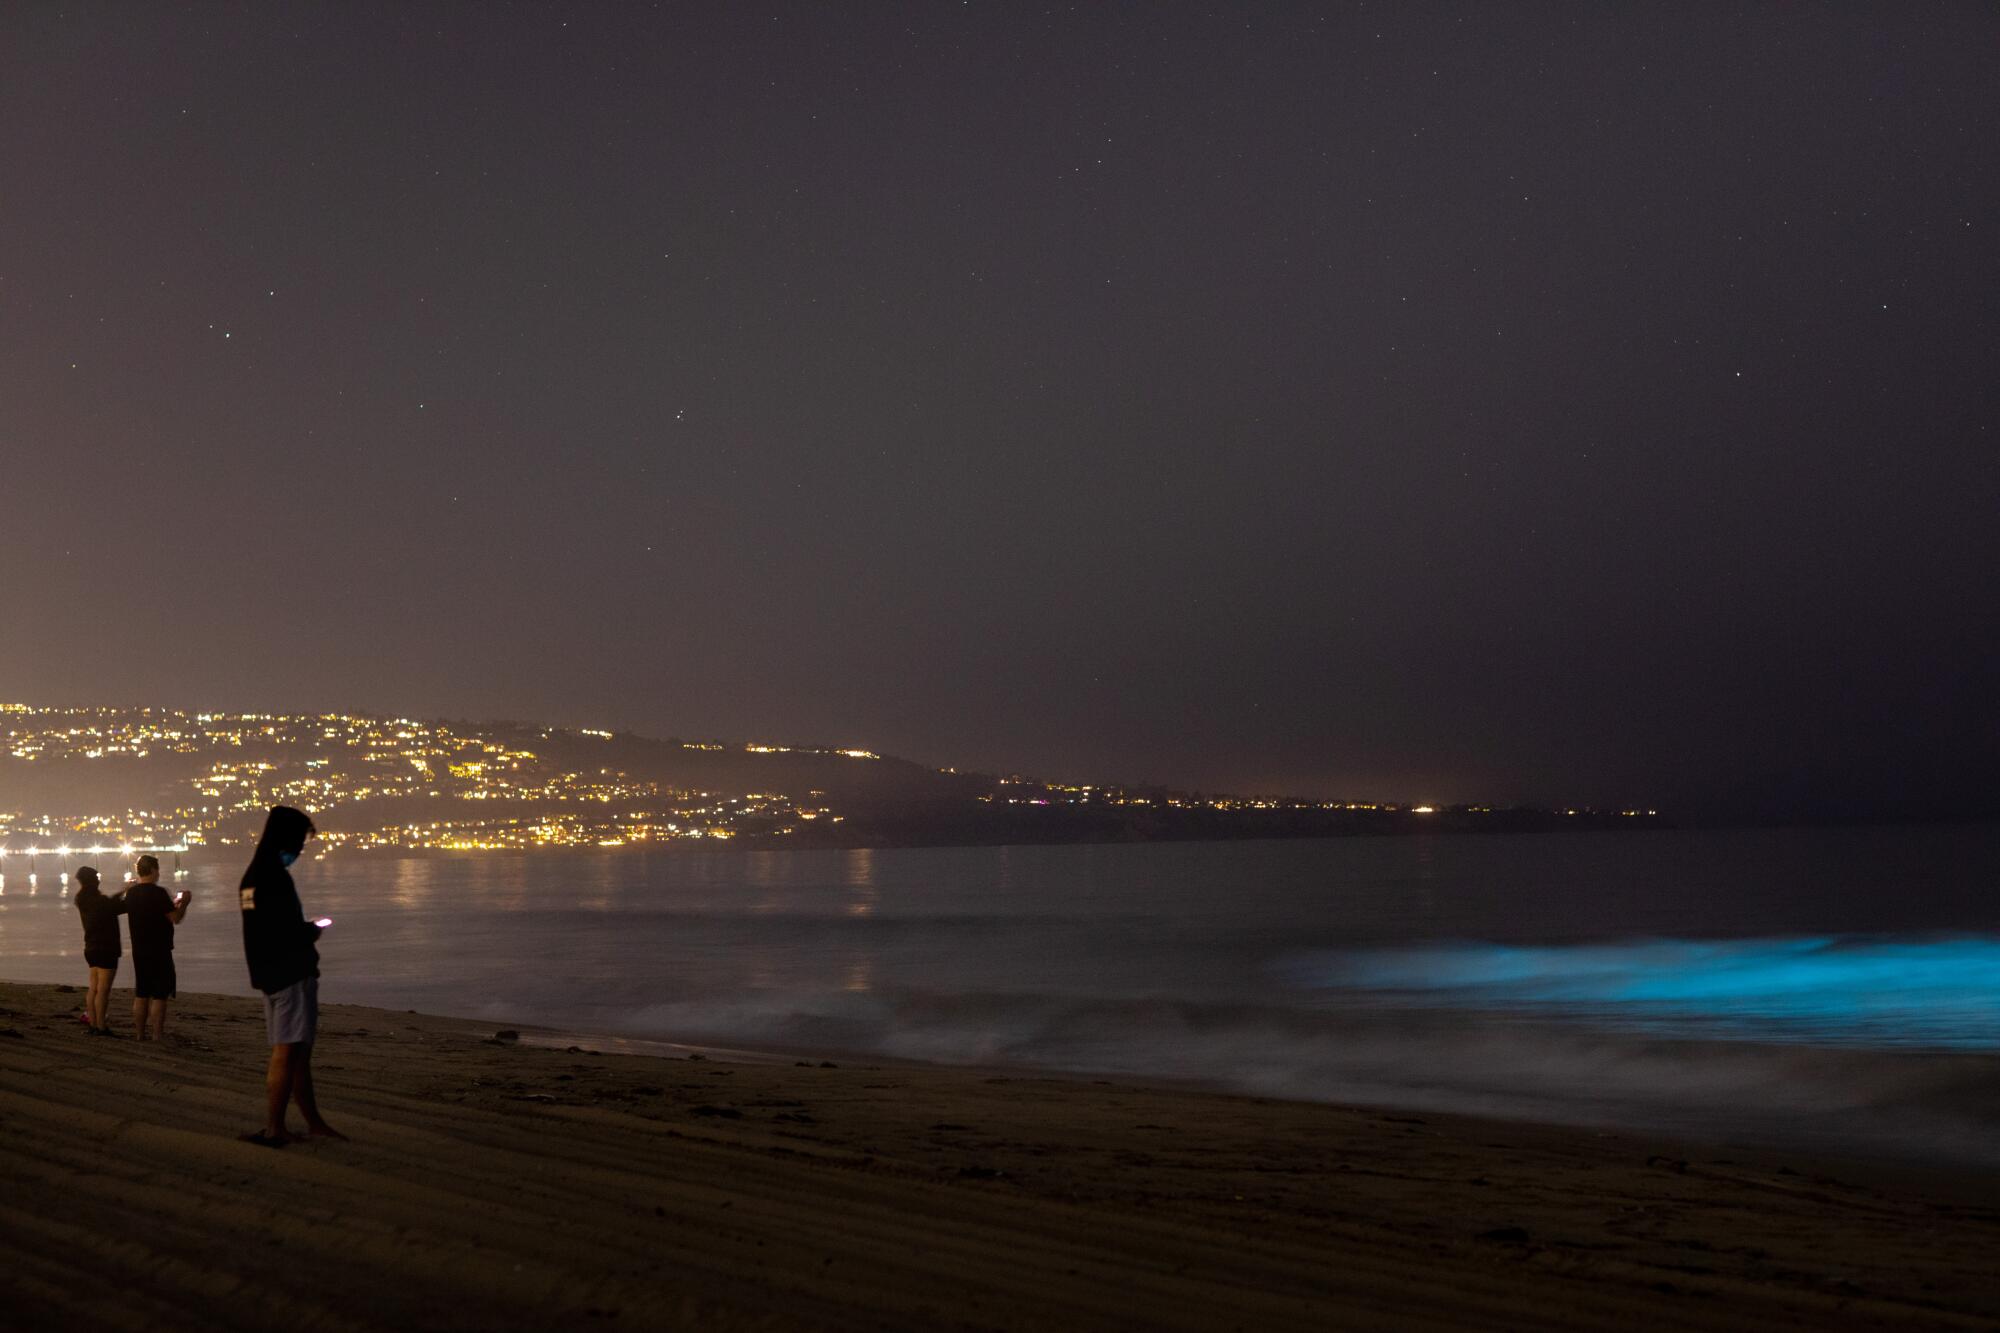 Pictures: Glowing Blue Waves Explained